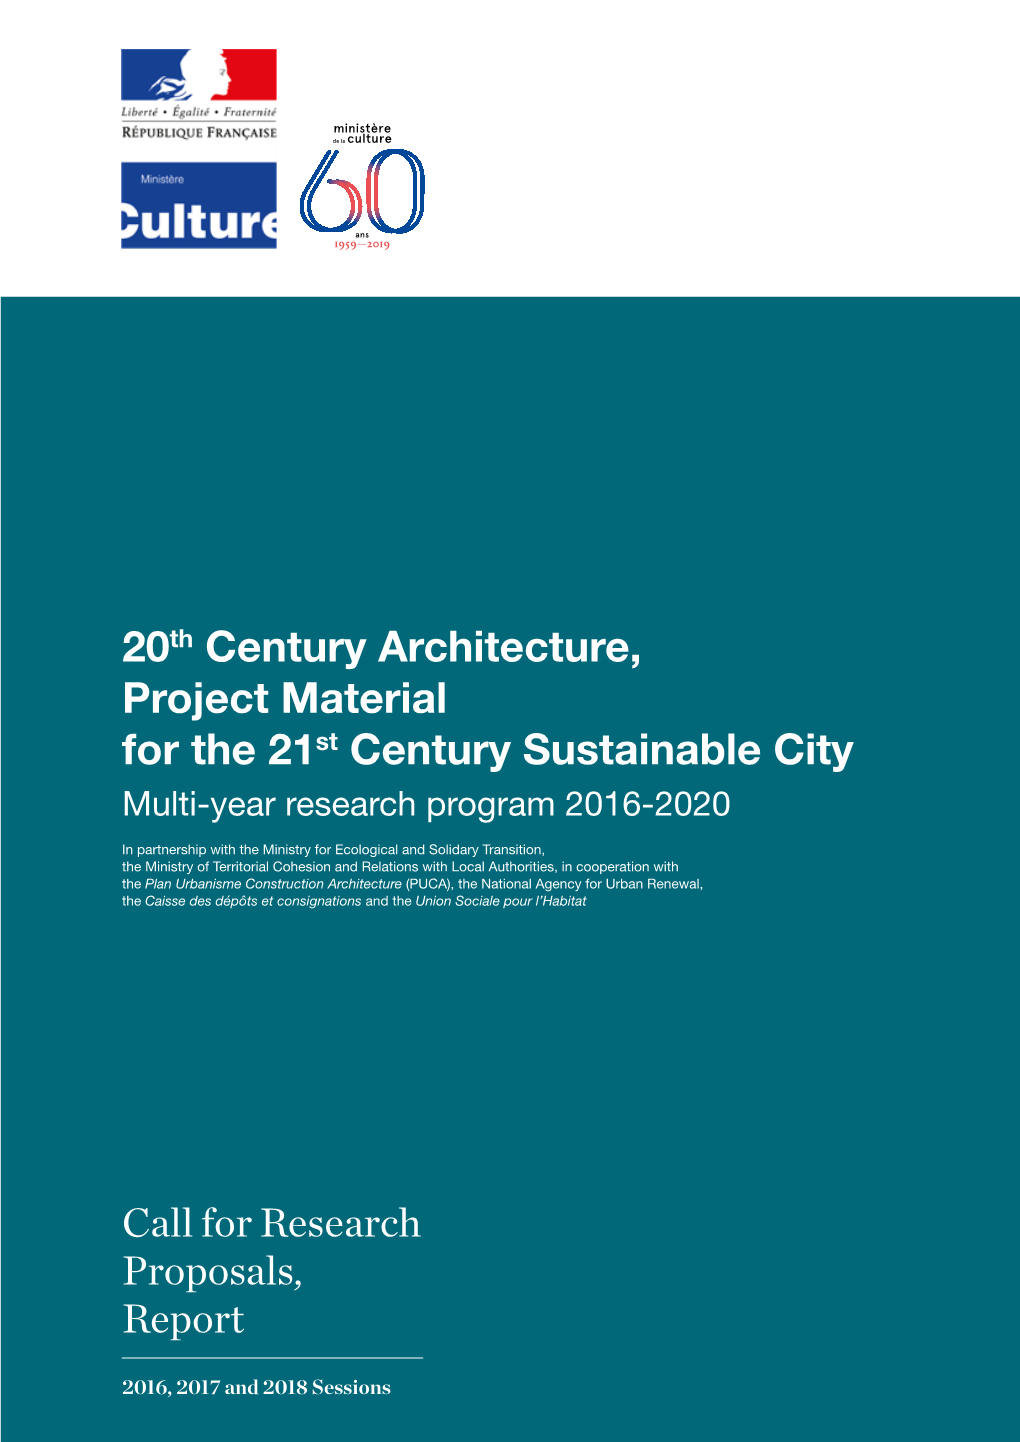 20Th Century Architecture, Project Material for the 21St Century Sustainable City Multi-Year Research Program 2016-2020